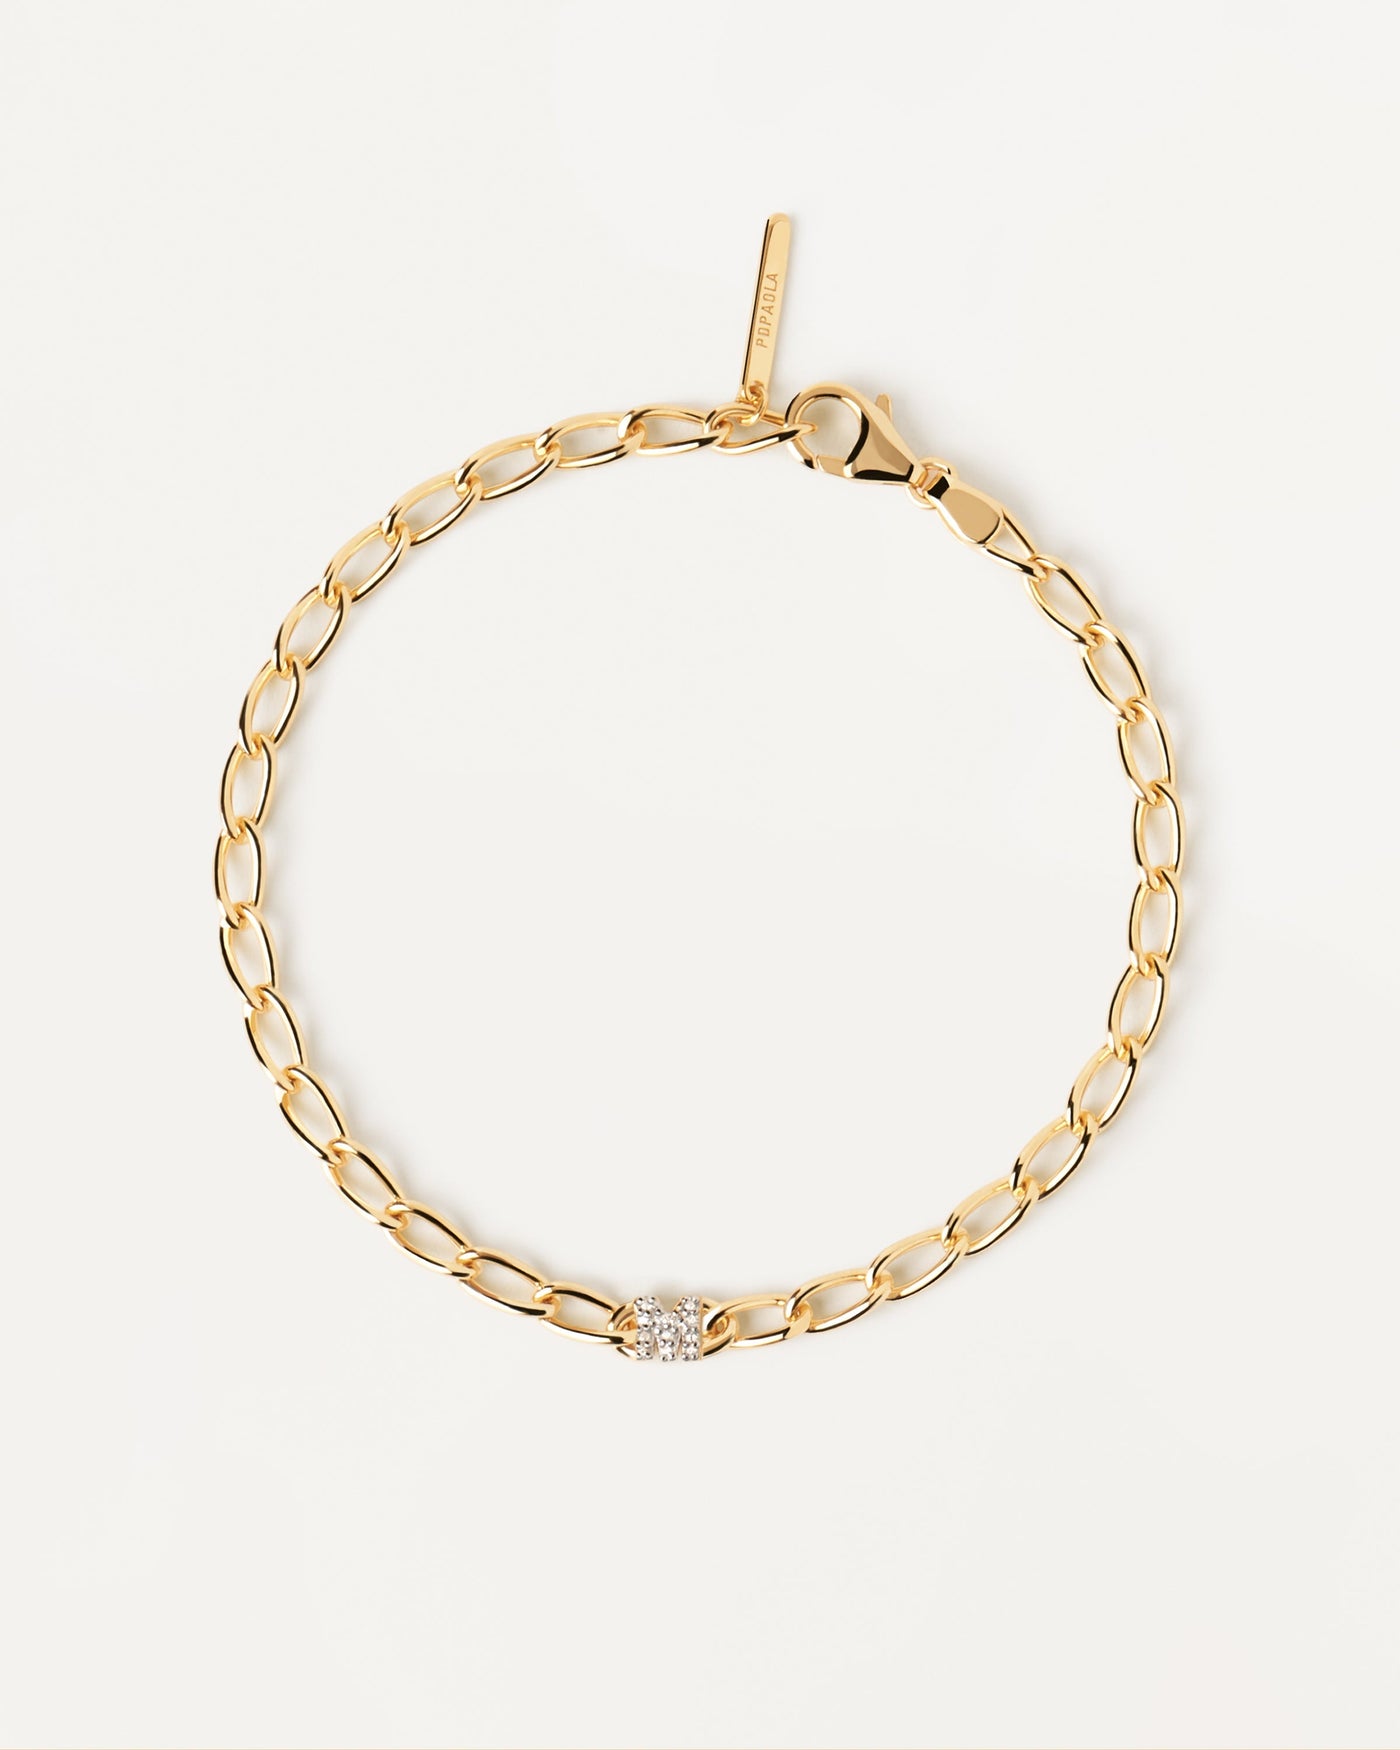 2023 Selection | Letter M Chain Bracelet. cable chain bracelet in gold-plated silver with initial M in zirconia. Get the latest arrival from PDPAOLA. Place your order safely and get this Best Seller. Free Shipping.